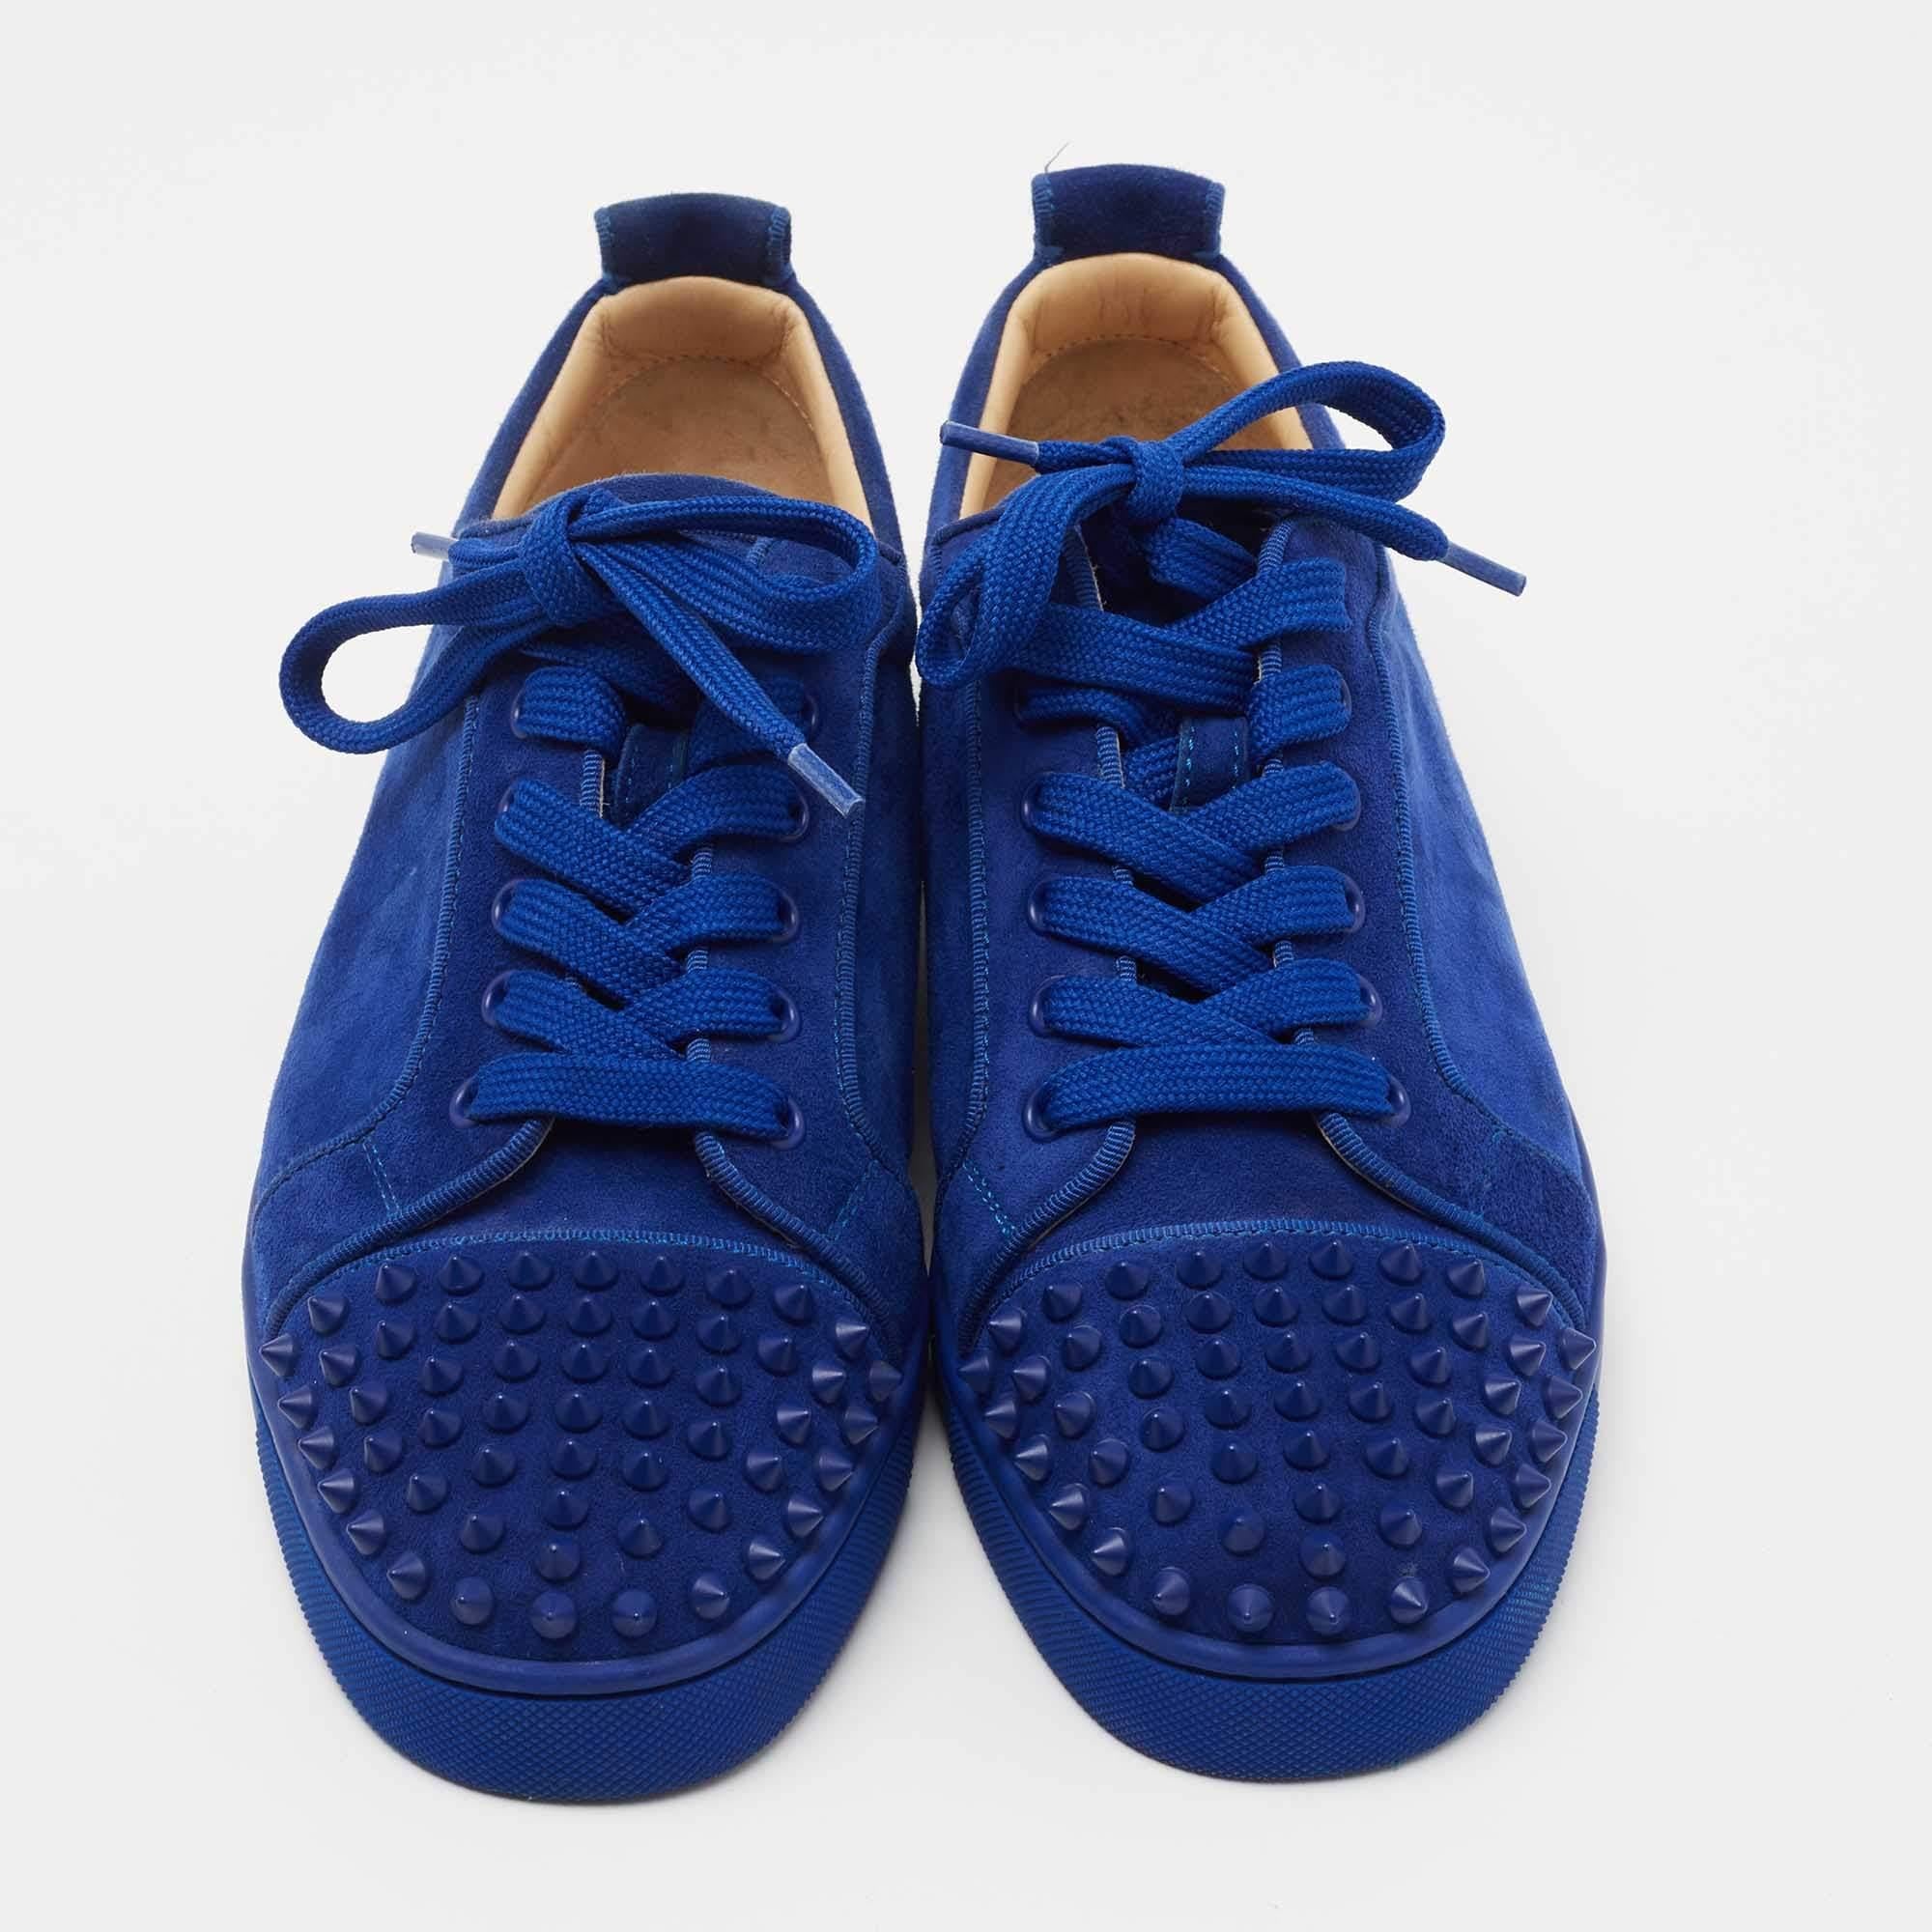 We see the edgy aesthetic of Christian Louboutin well-translated into these sneakers. They are crafted from suede with spikes decorated on the cap toes. Lace-ups and leather insoles complete them. The red soles of the low-top Louis Junior Spikes